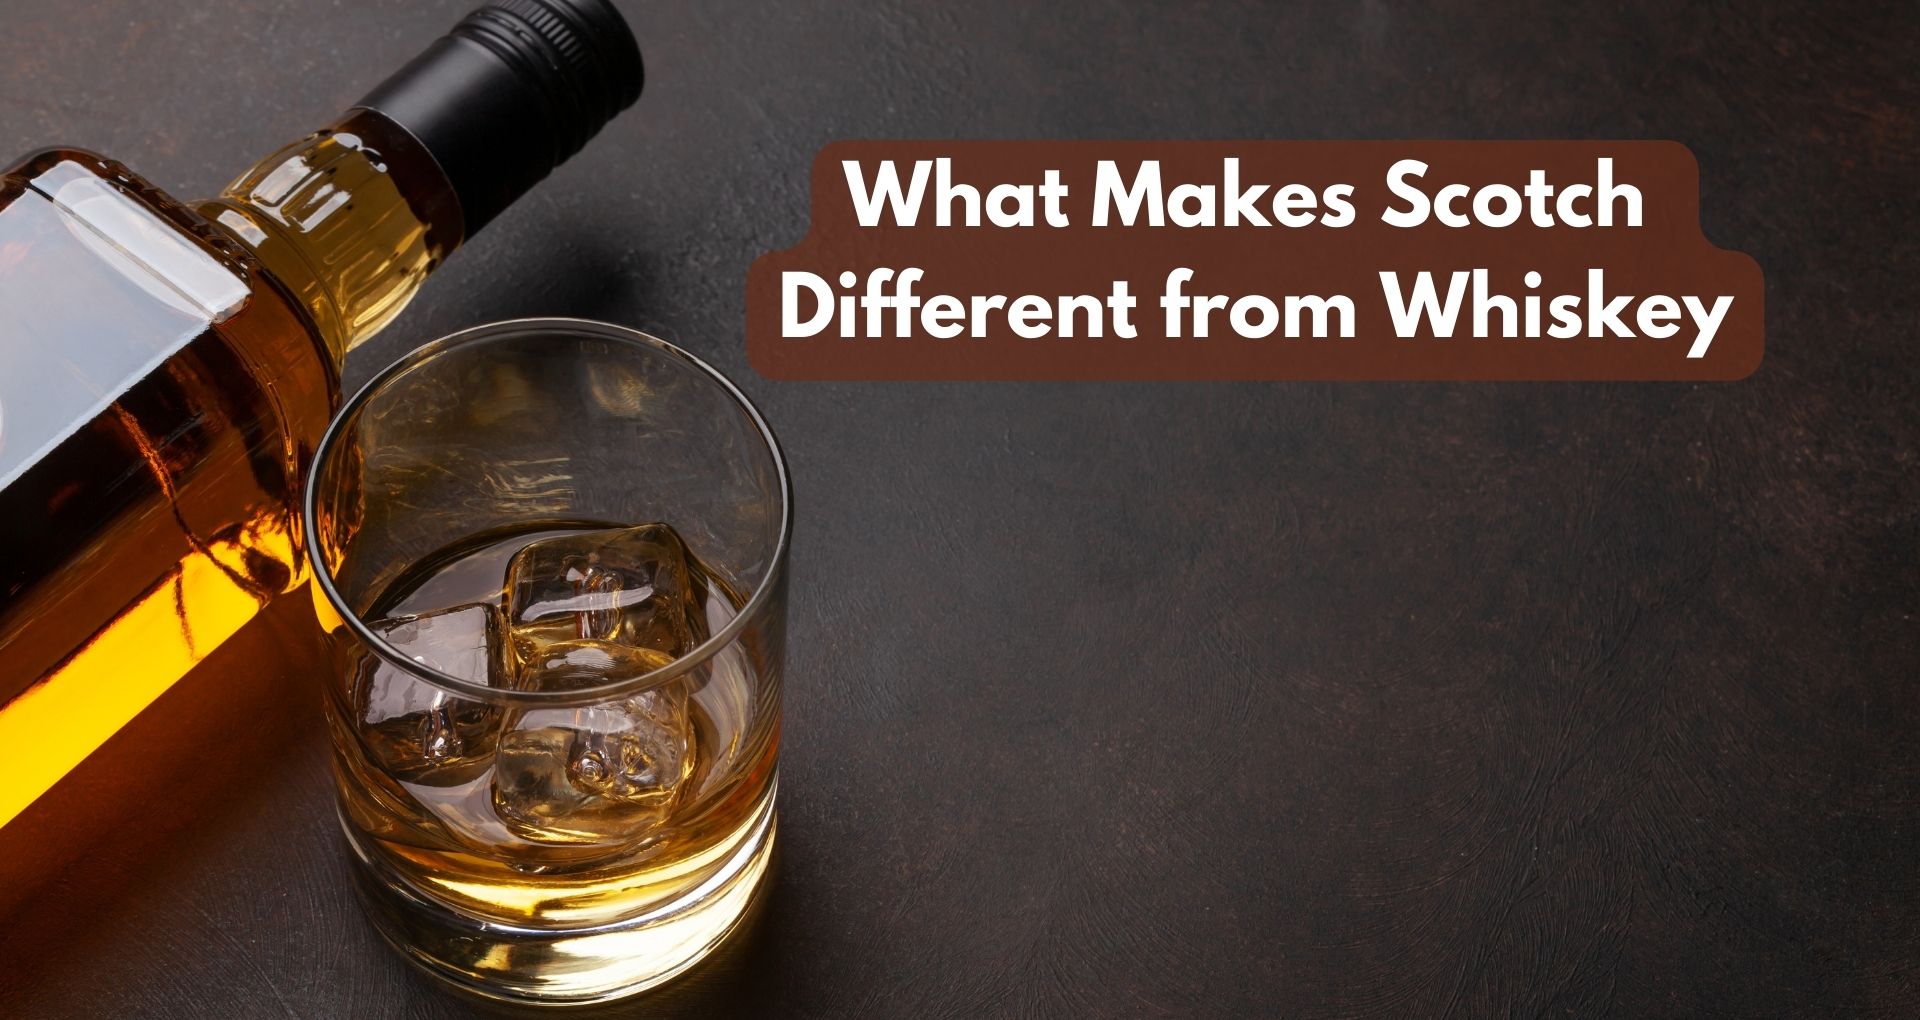 What Makes Scotch Different from Whiskey?